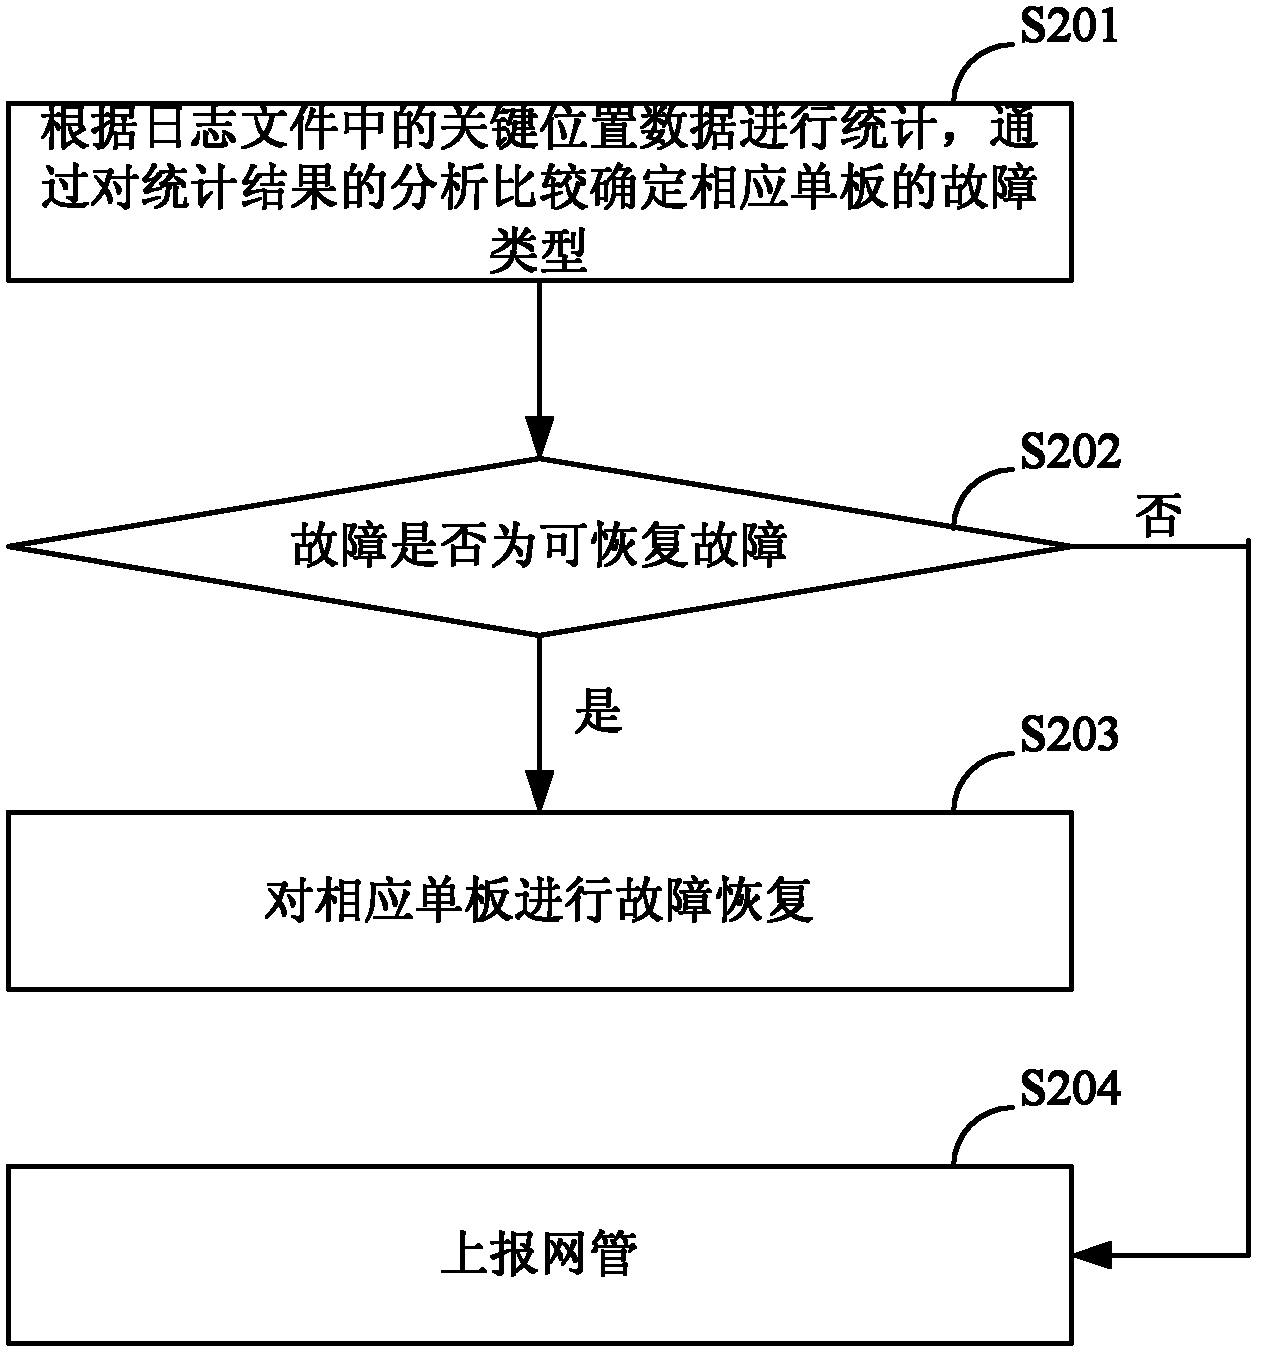 Fault processing method of network equipment and system